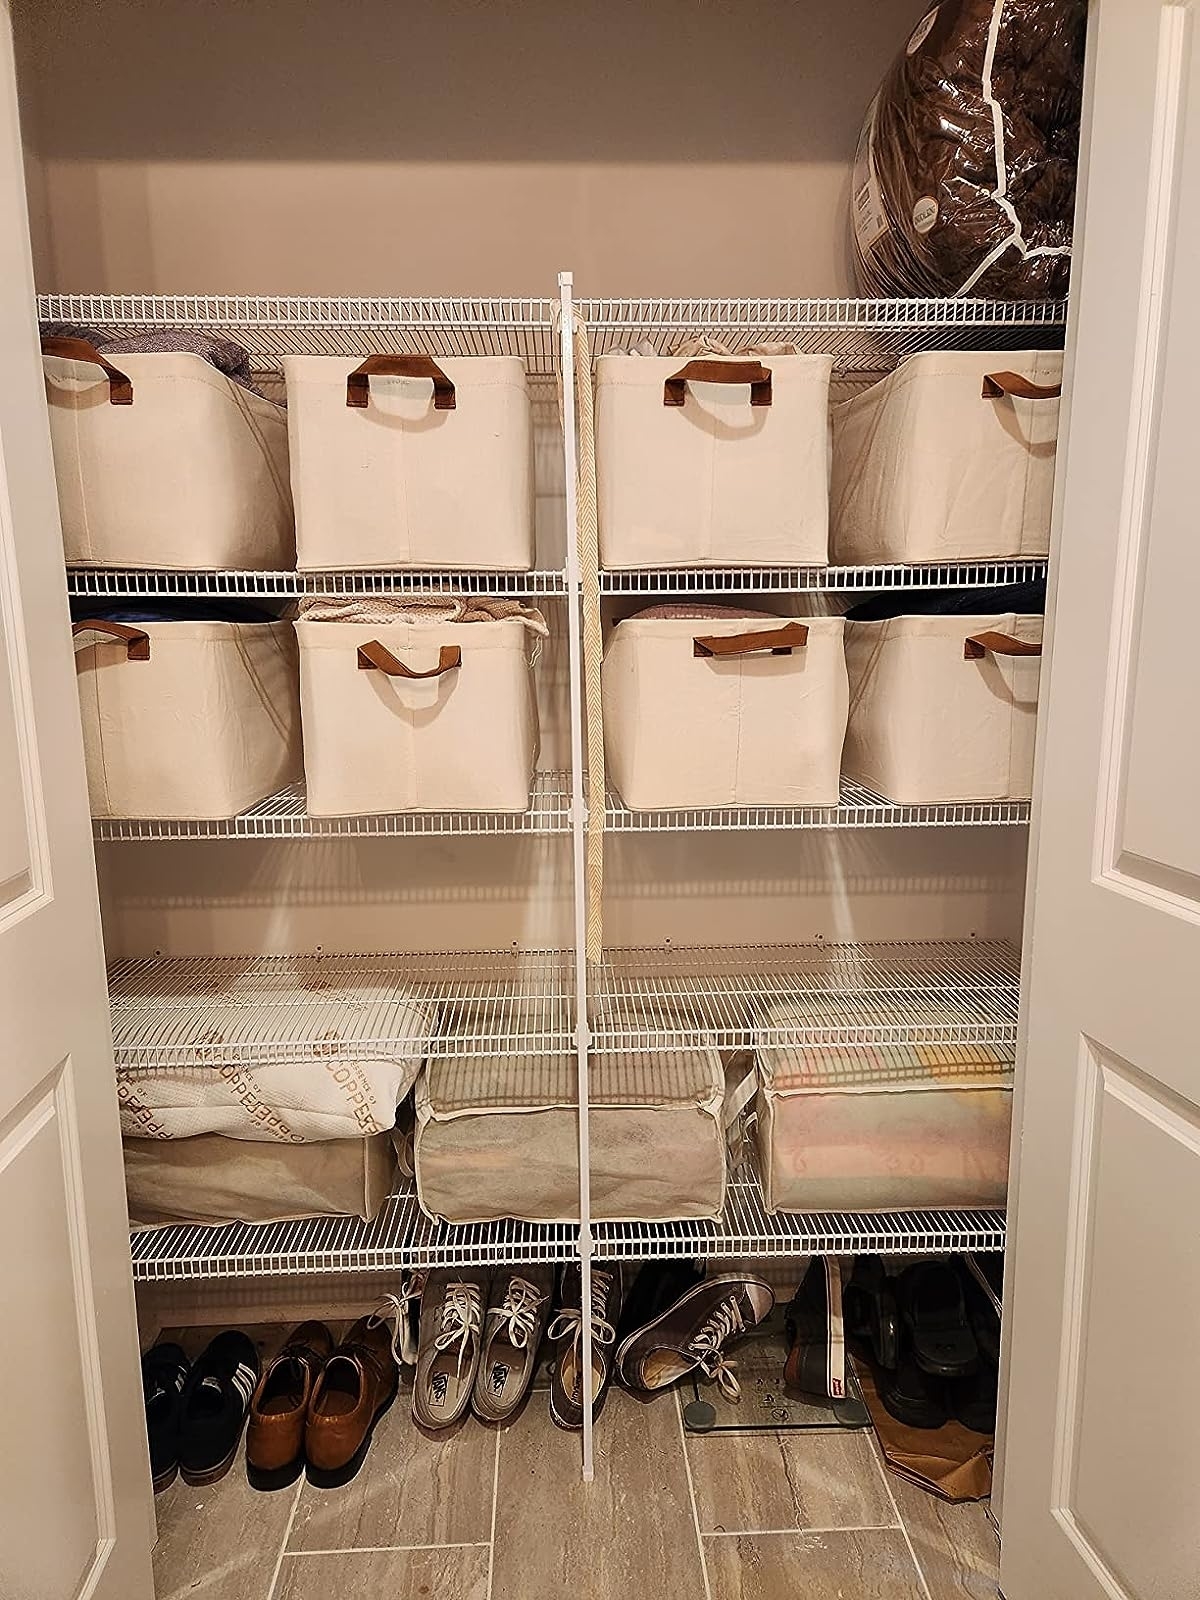 Reviewer image of the bins on closet shelves